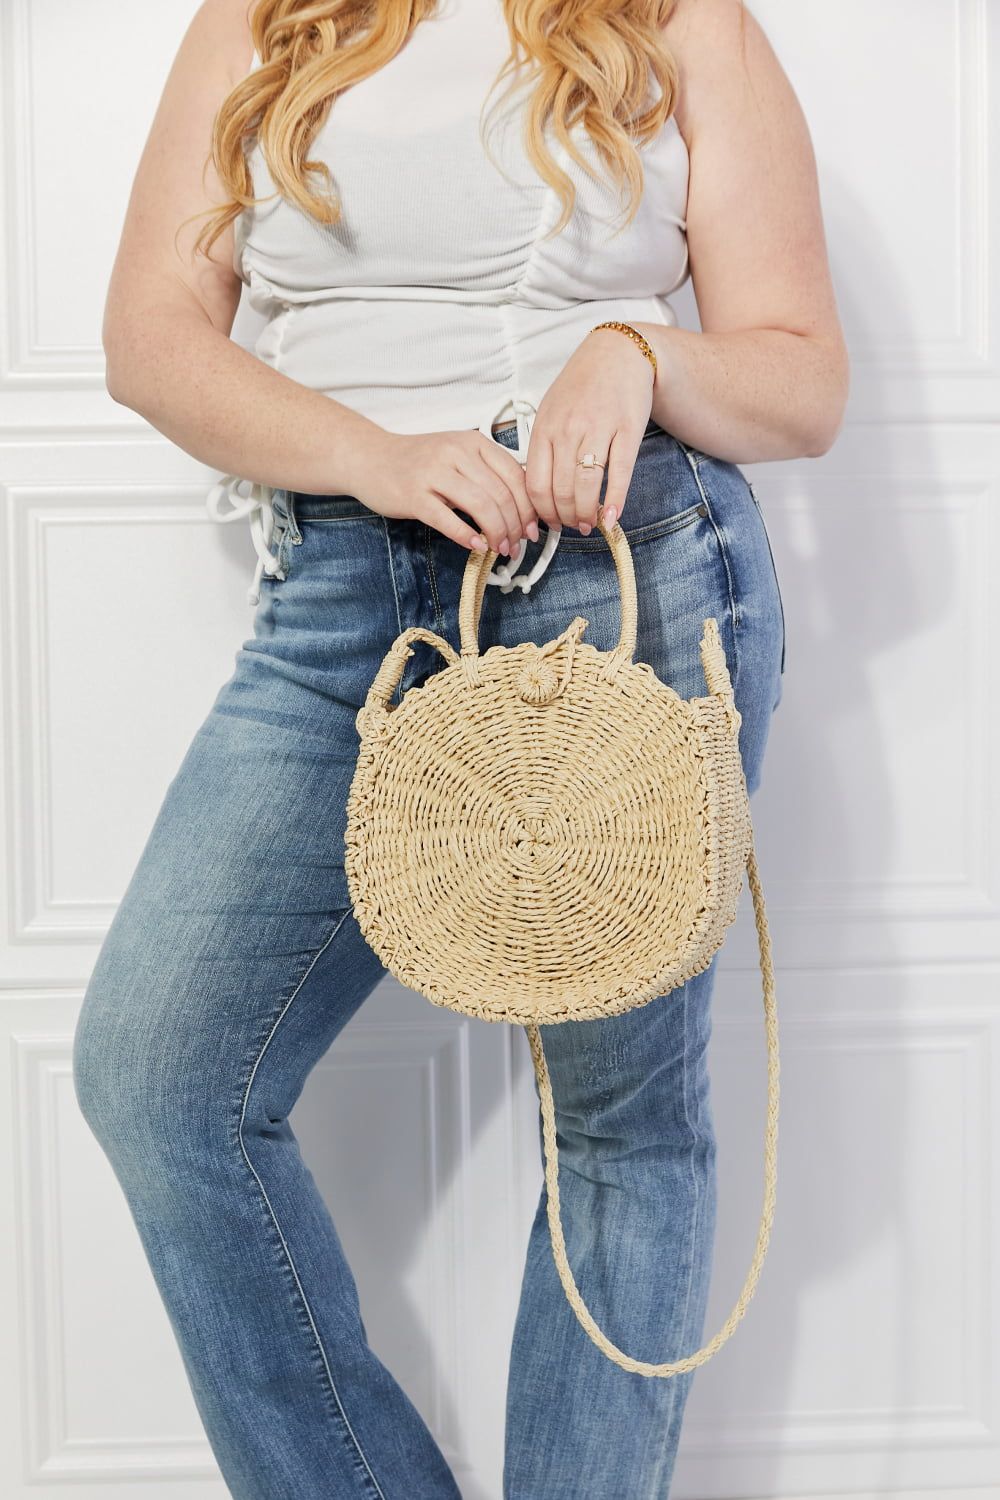 Justin Taylor Feeling Cute Rounded Rattan Handbag in Ivory - By Baano